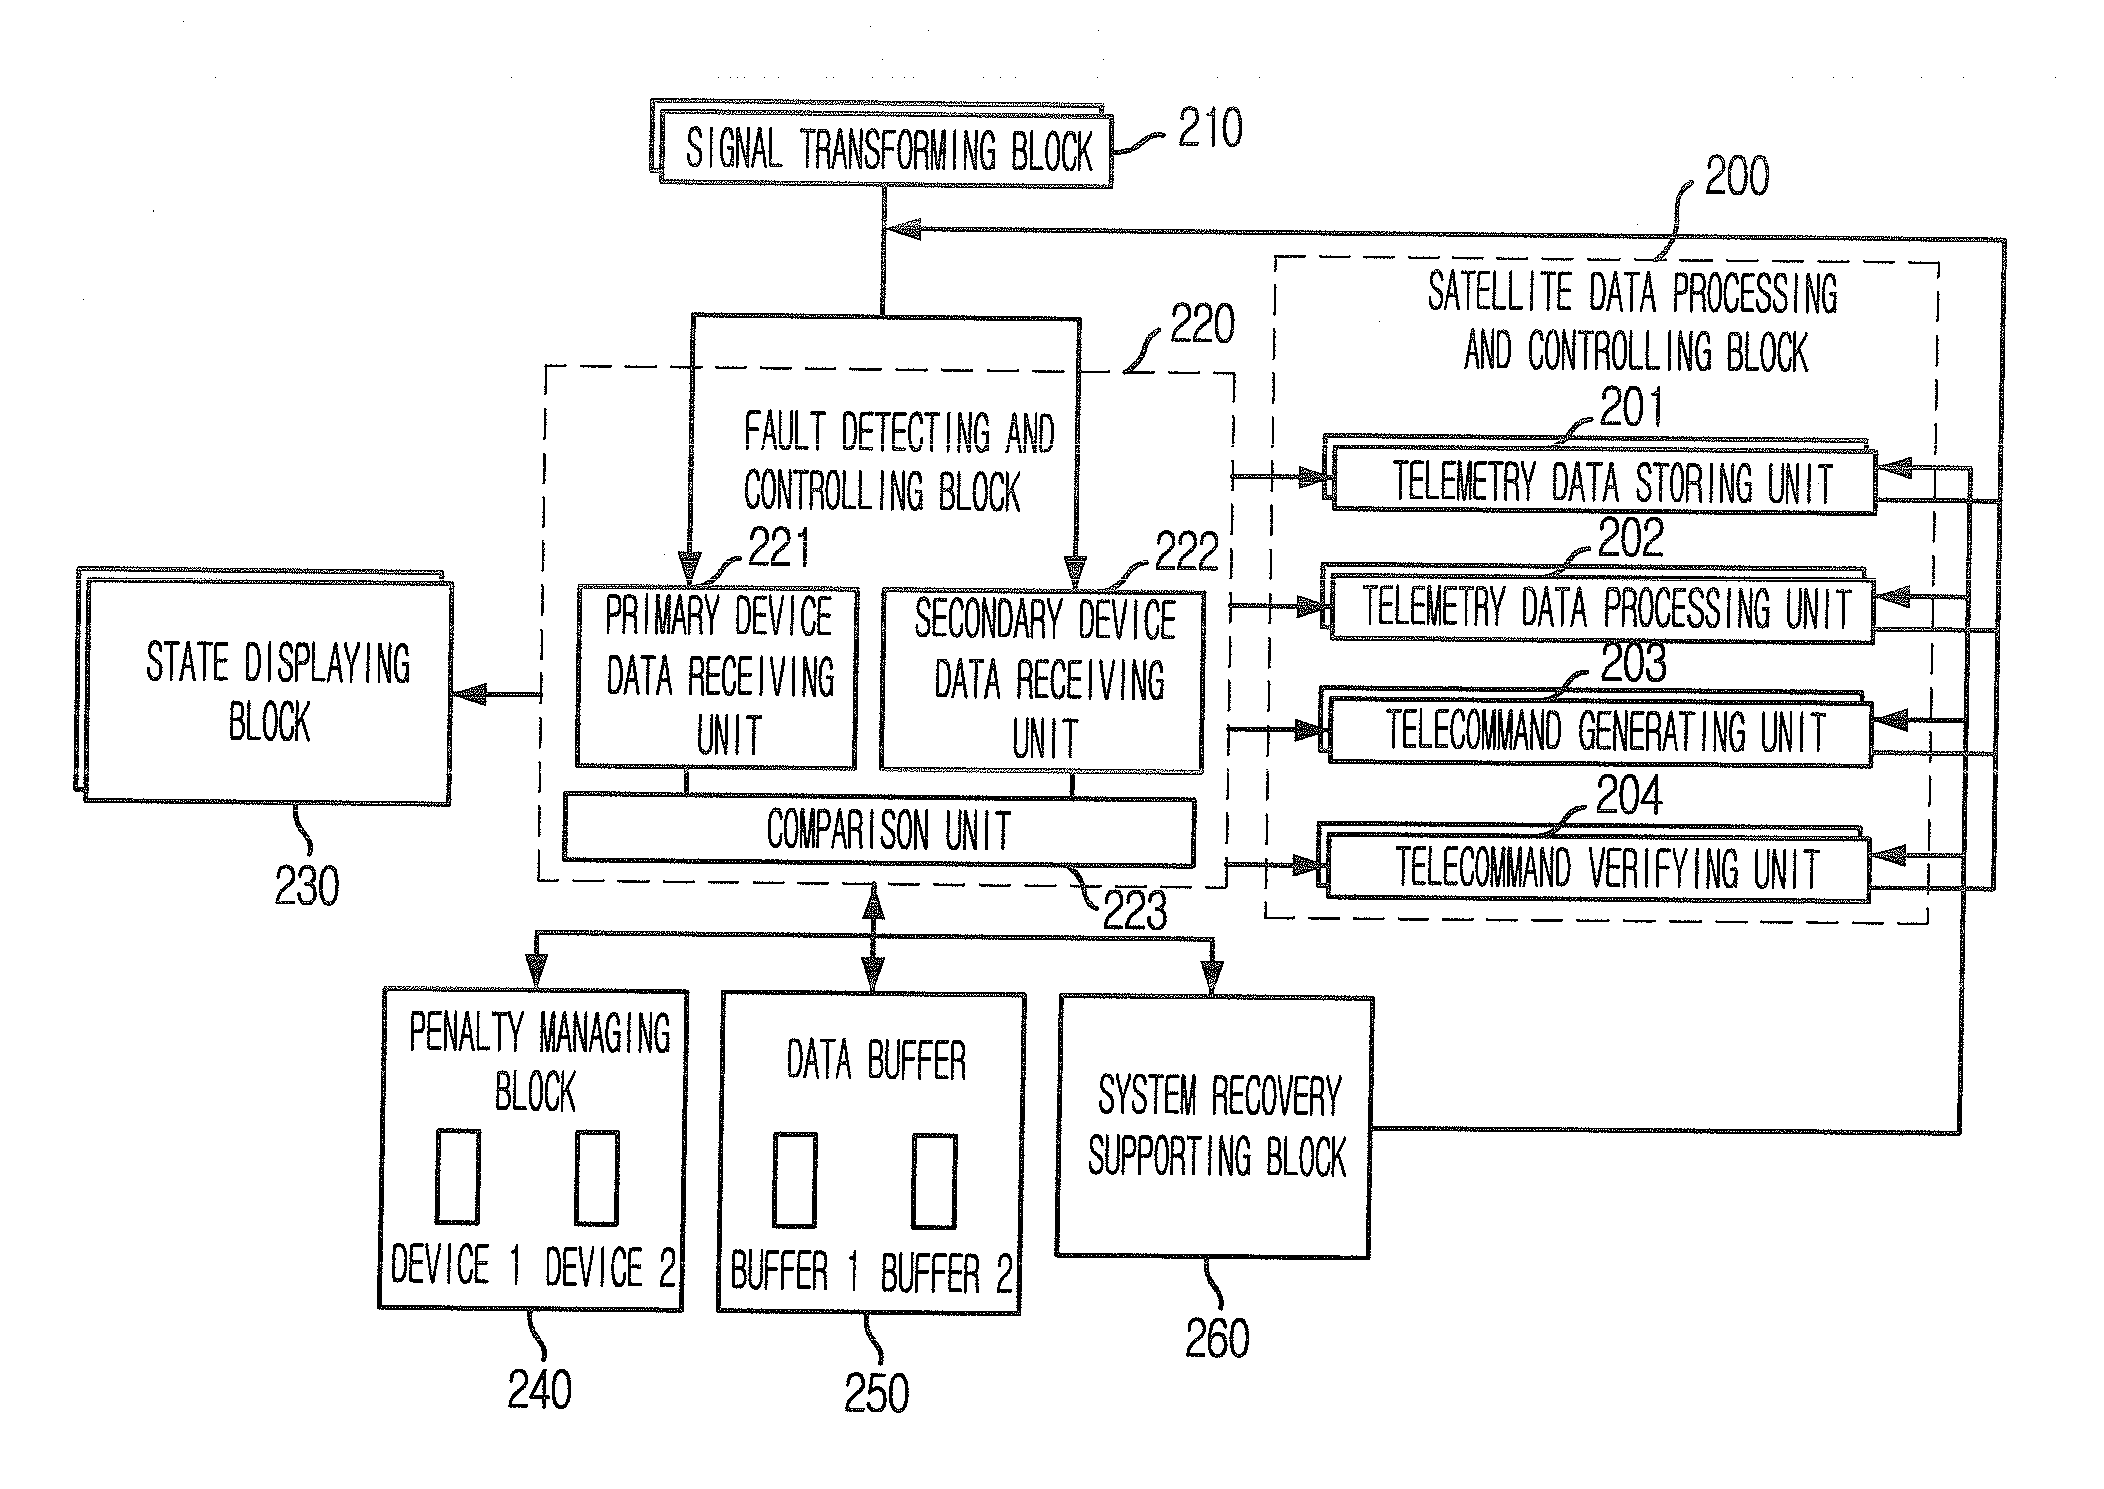 Apparatus and Method for Diagnosing Fault and Managing Data in Satellite Ground System